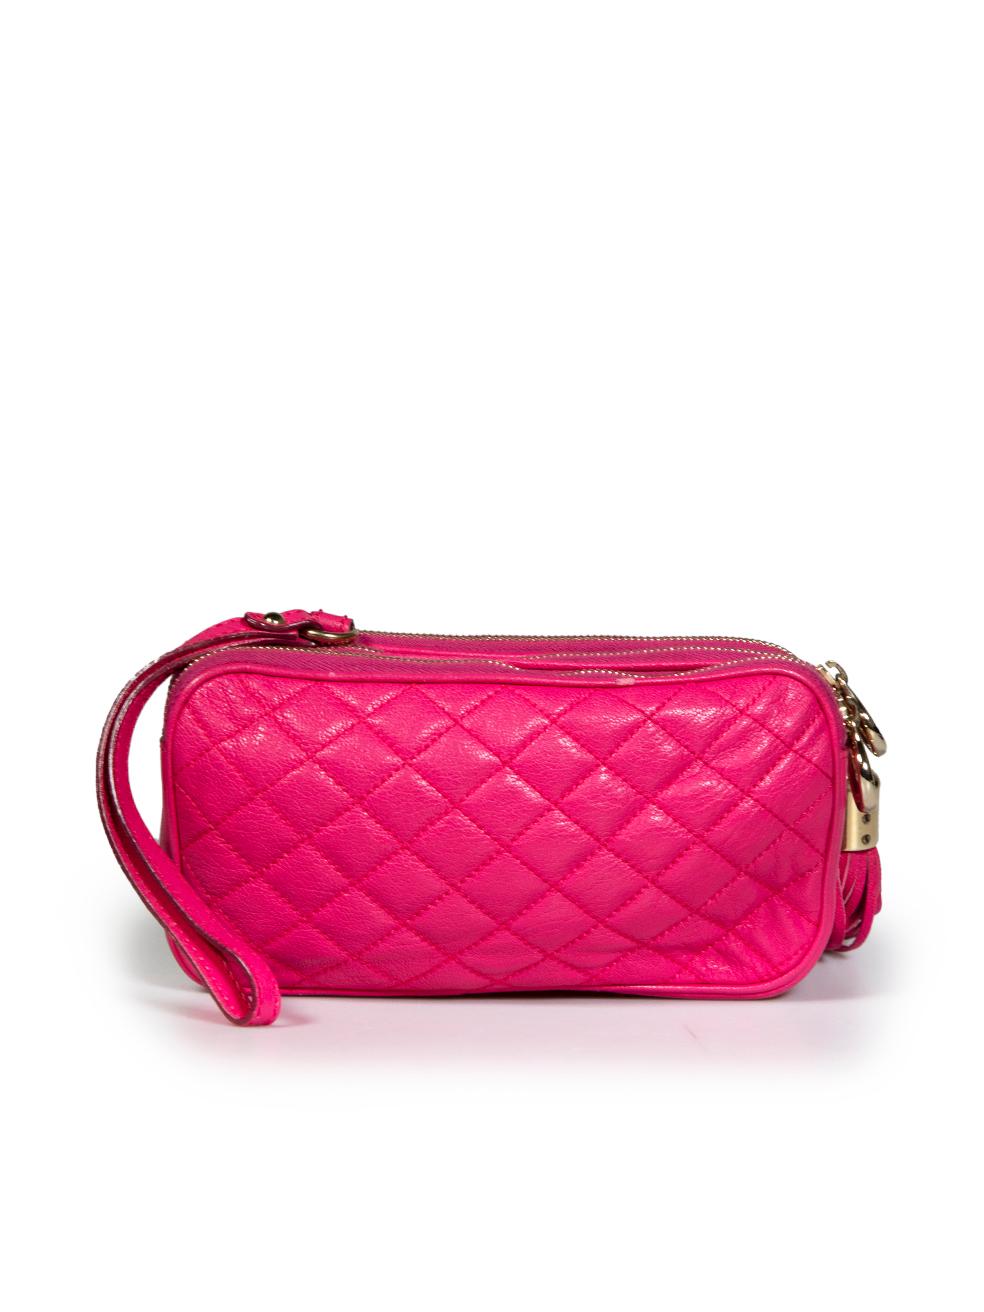 Dolce & Gabbana Pink Quilted Lily Glam Clutch In Excellent Condition For Sale In London, GB